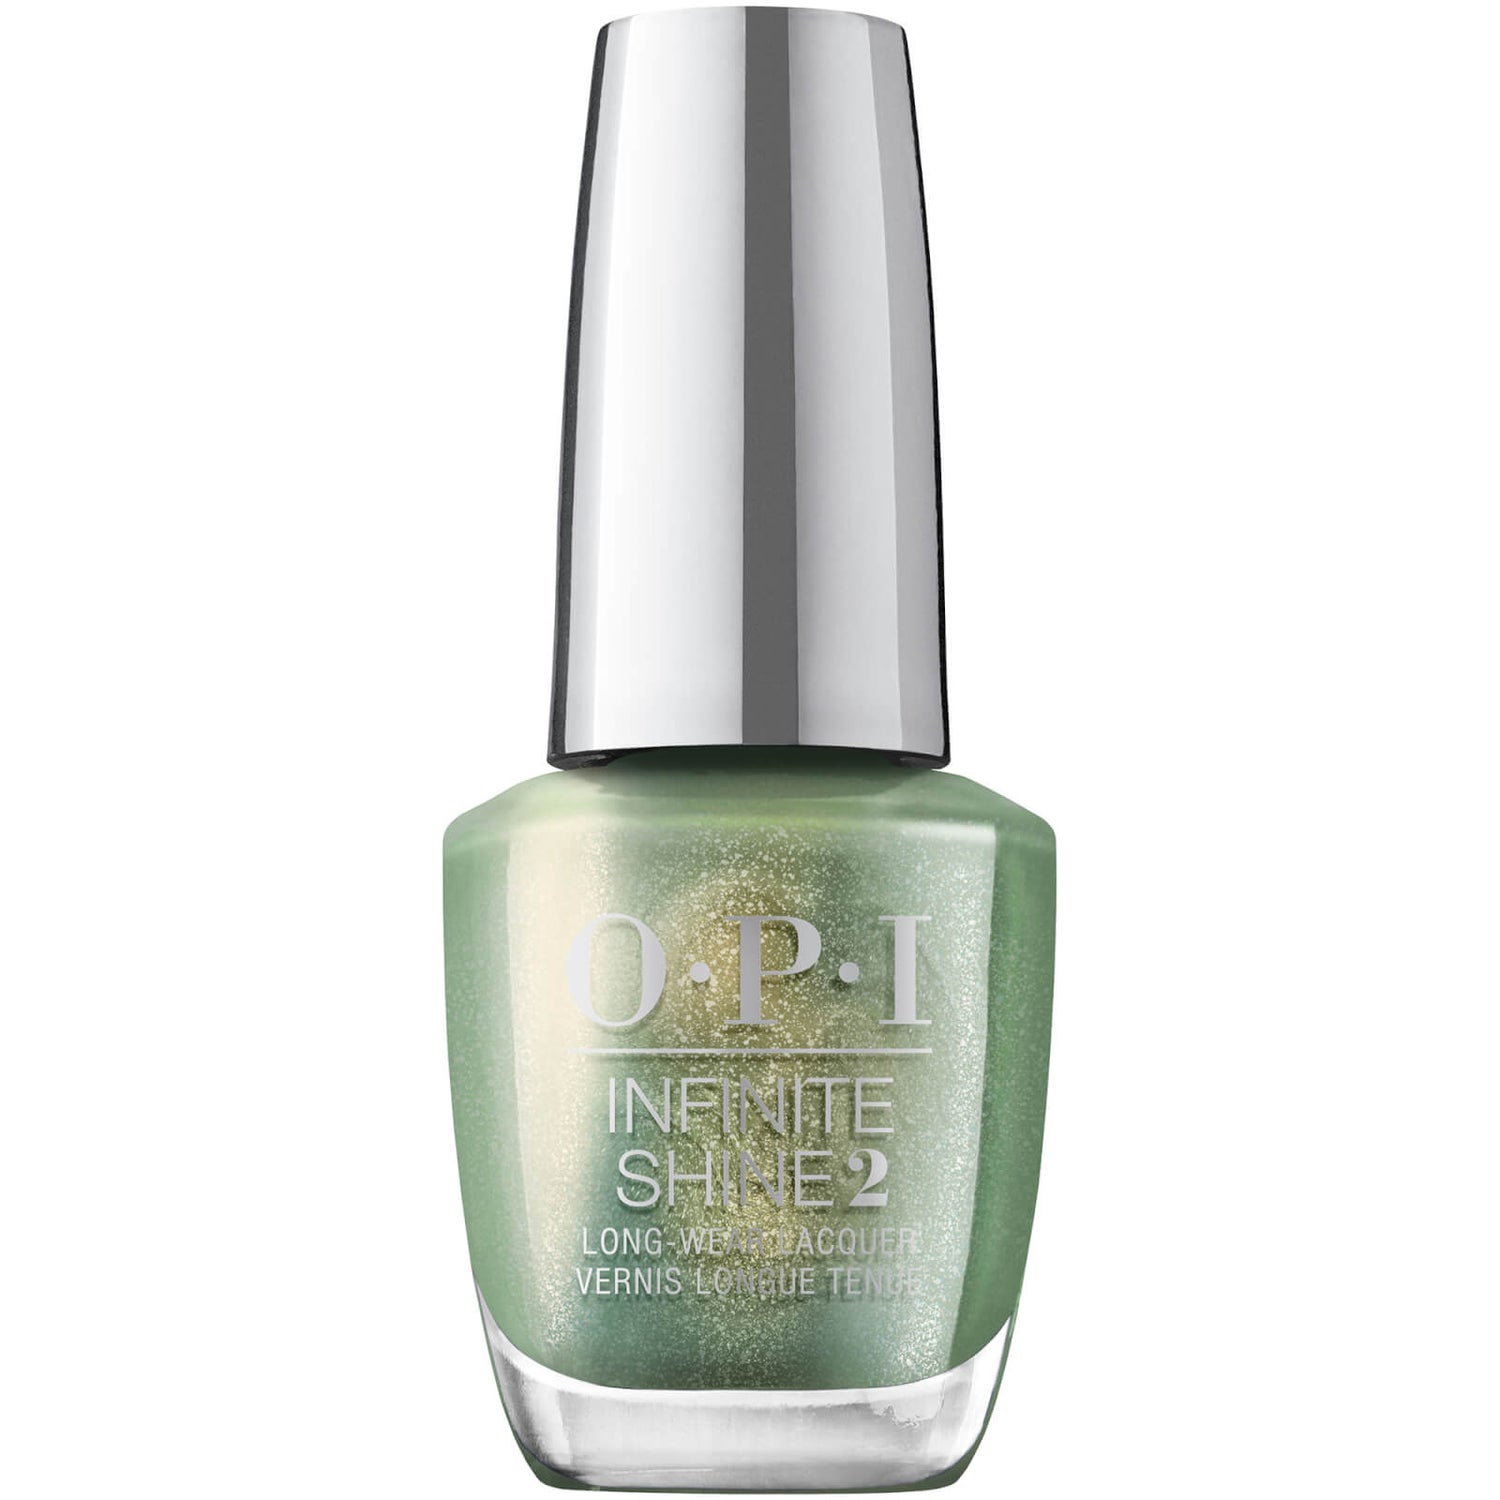 OPI Jewel Be Bold Collection Infinite Shine Nail Polish - Decked to the Pines